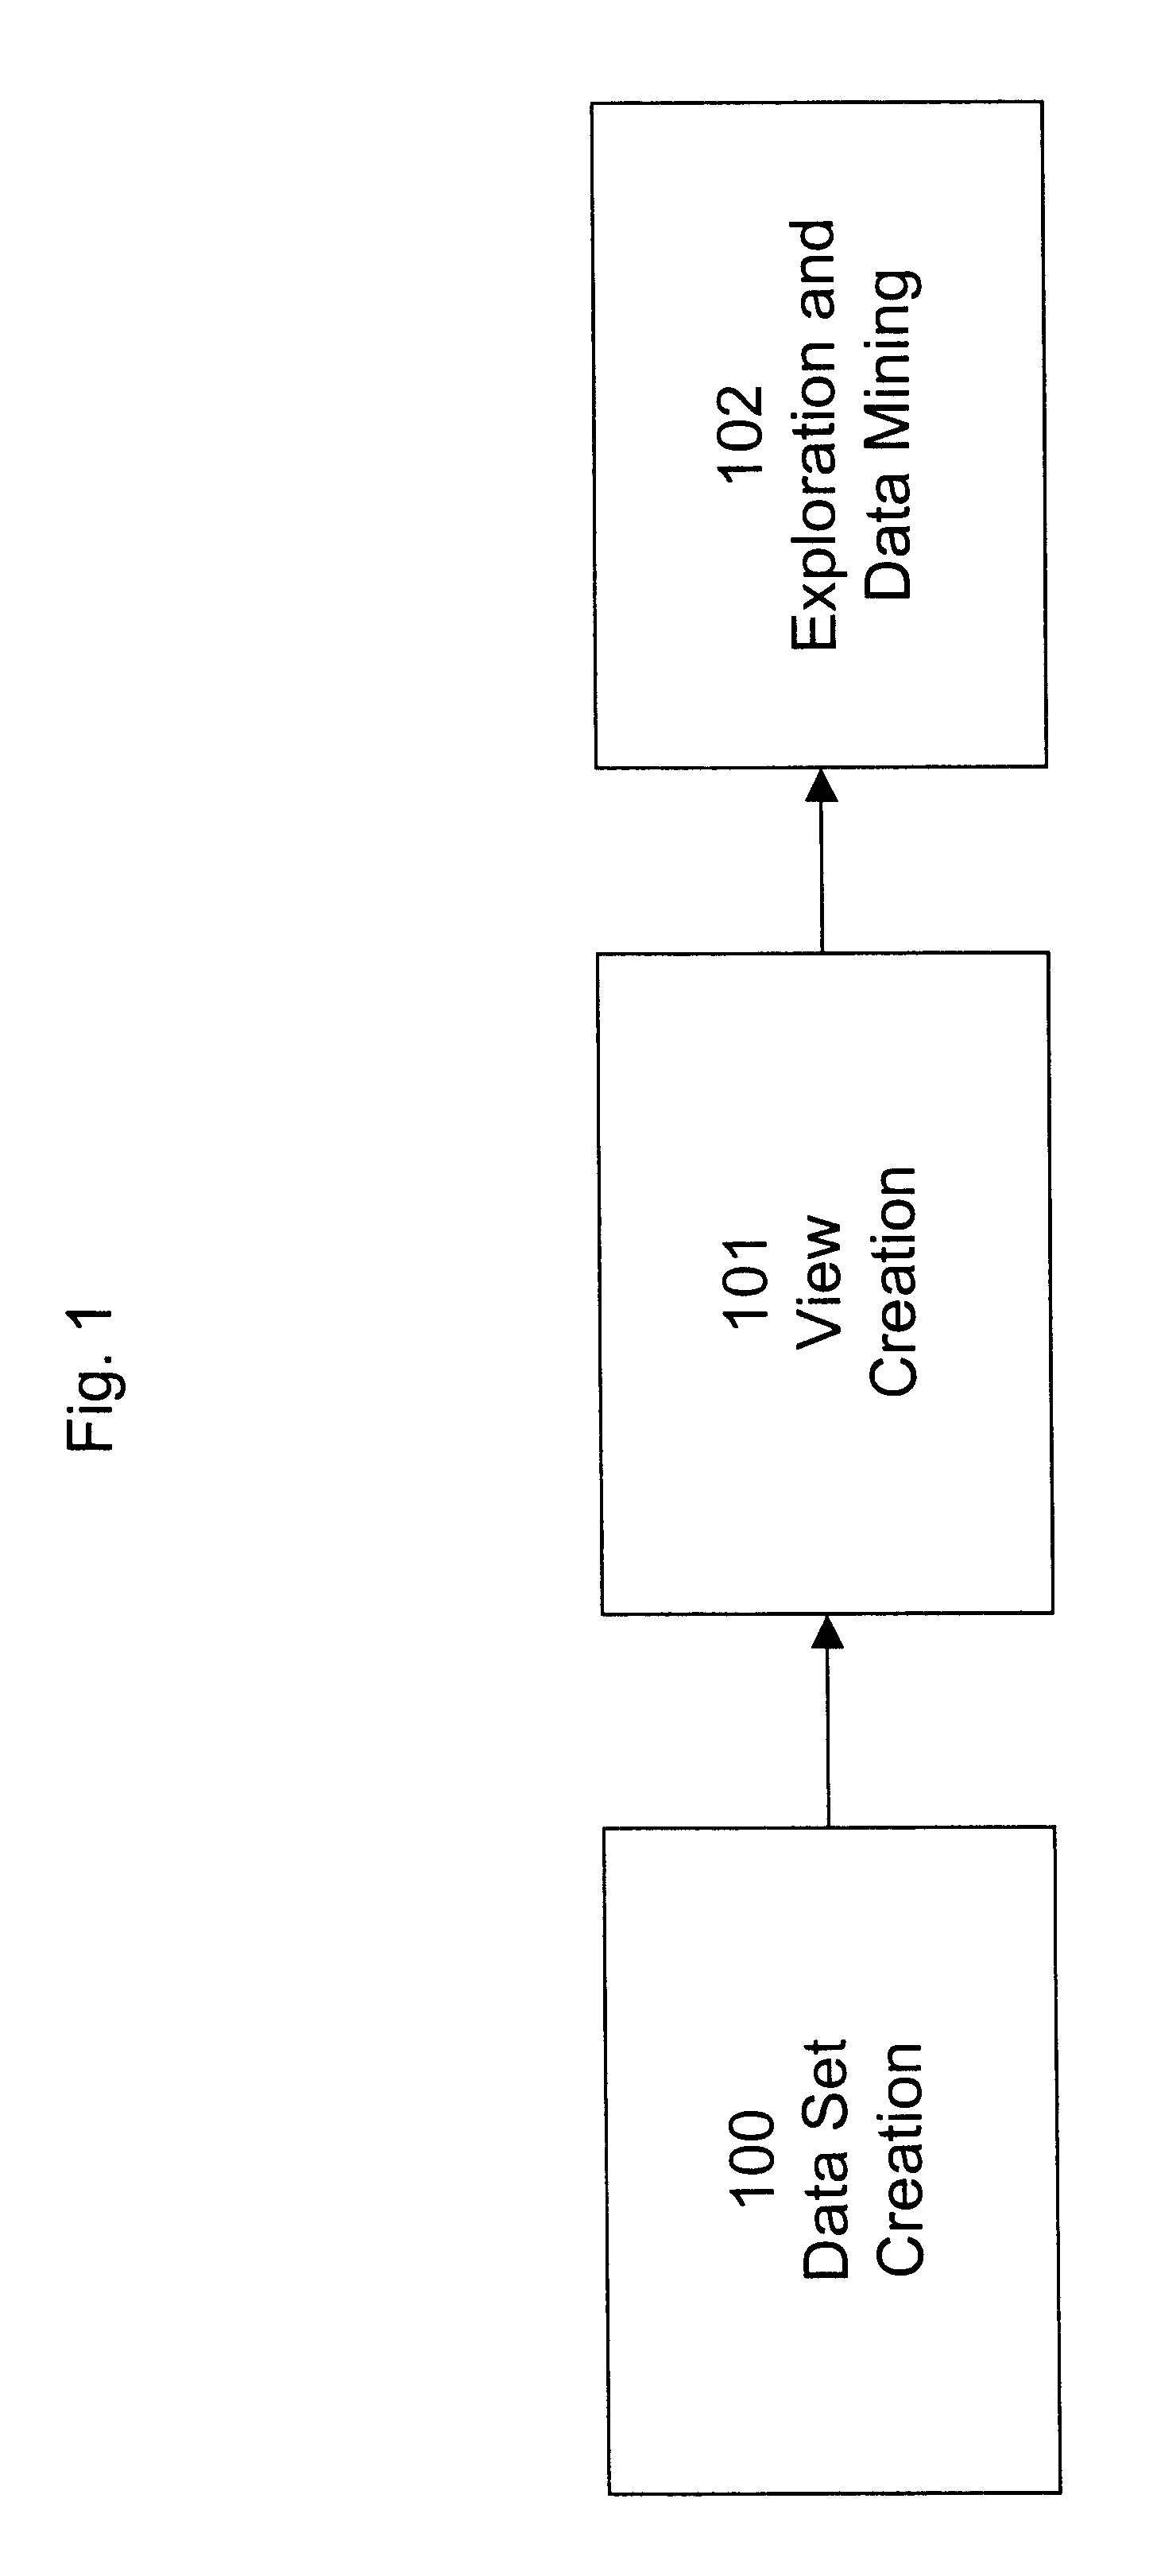 System and method for use in text analysis of documents and records